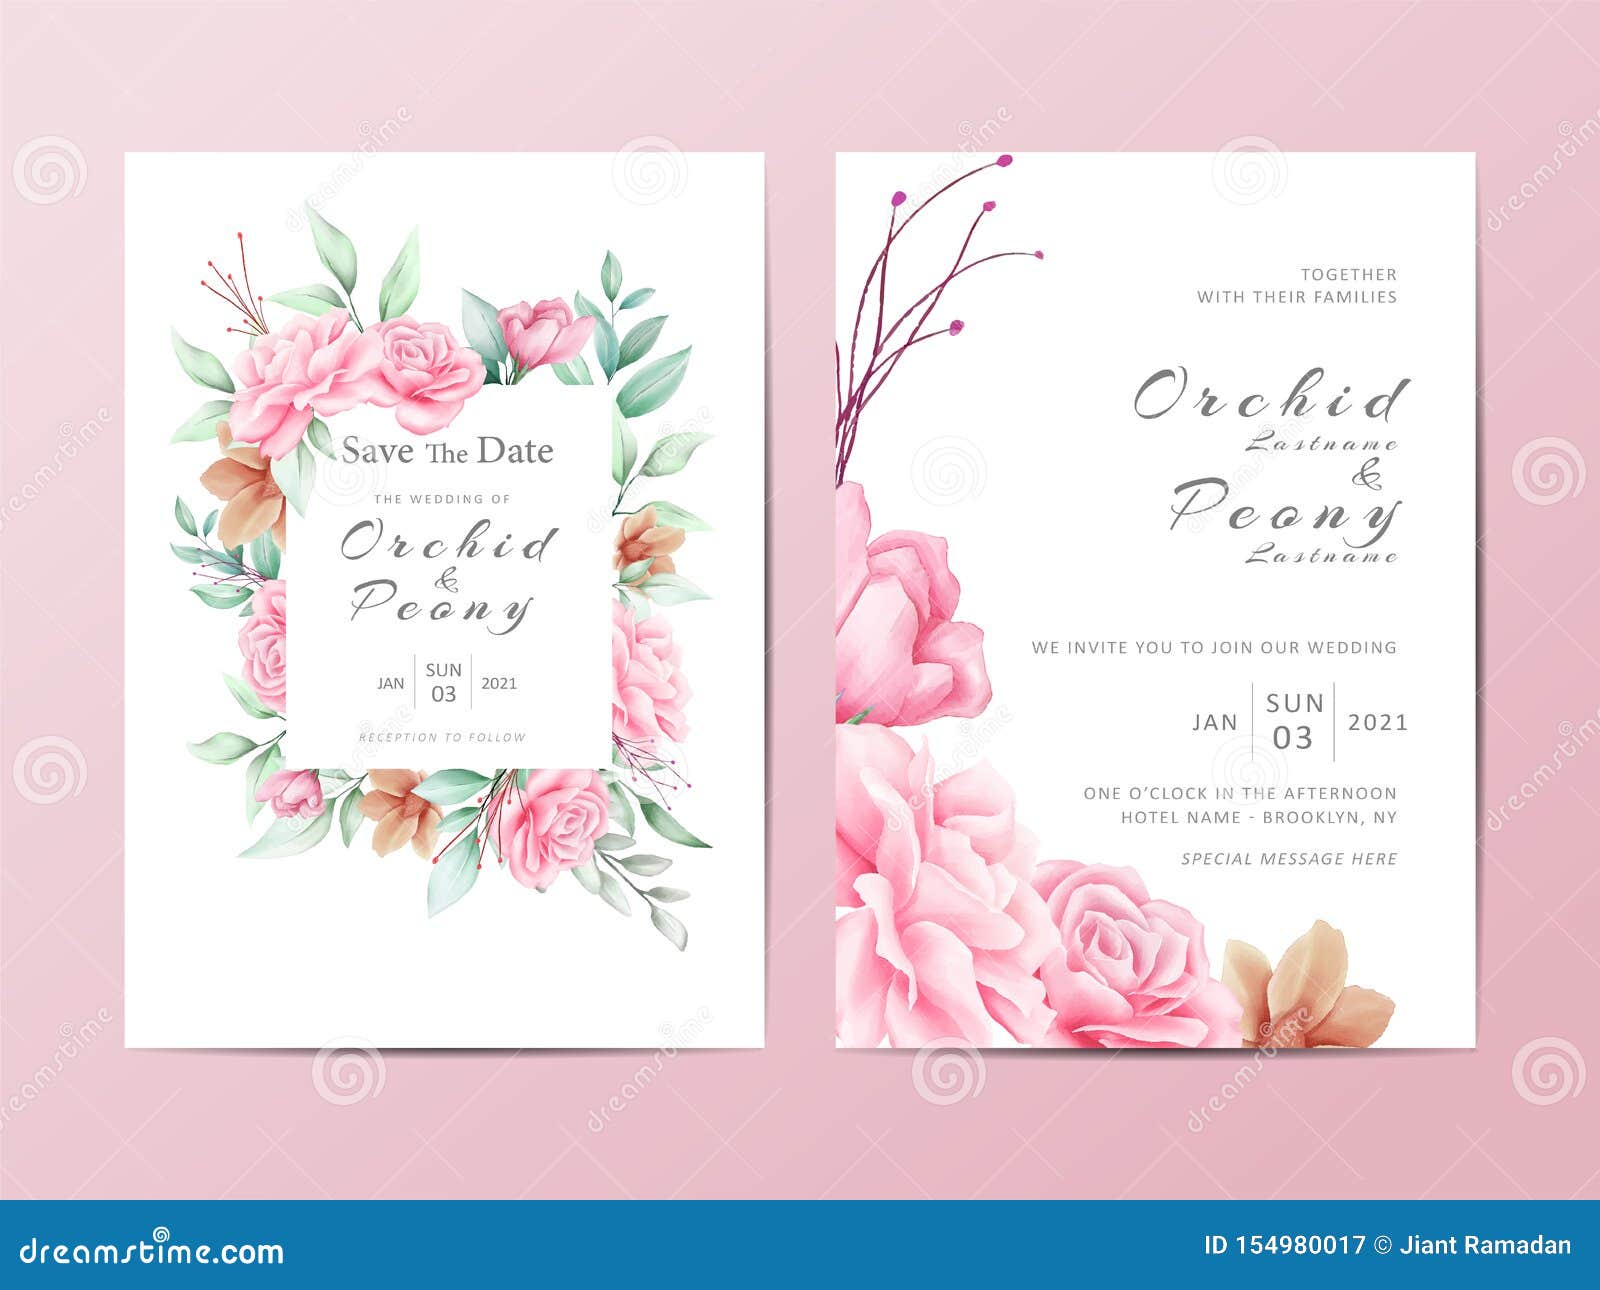 Editable Invitation Template from thumbs.dreamstime.com